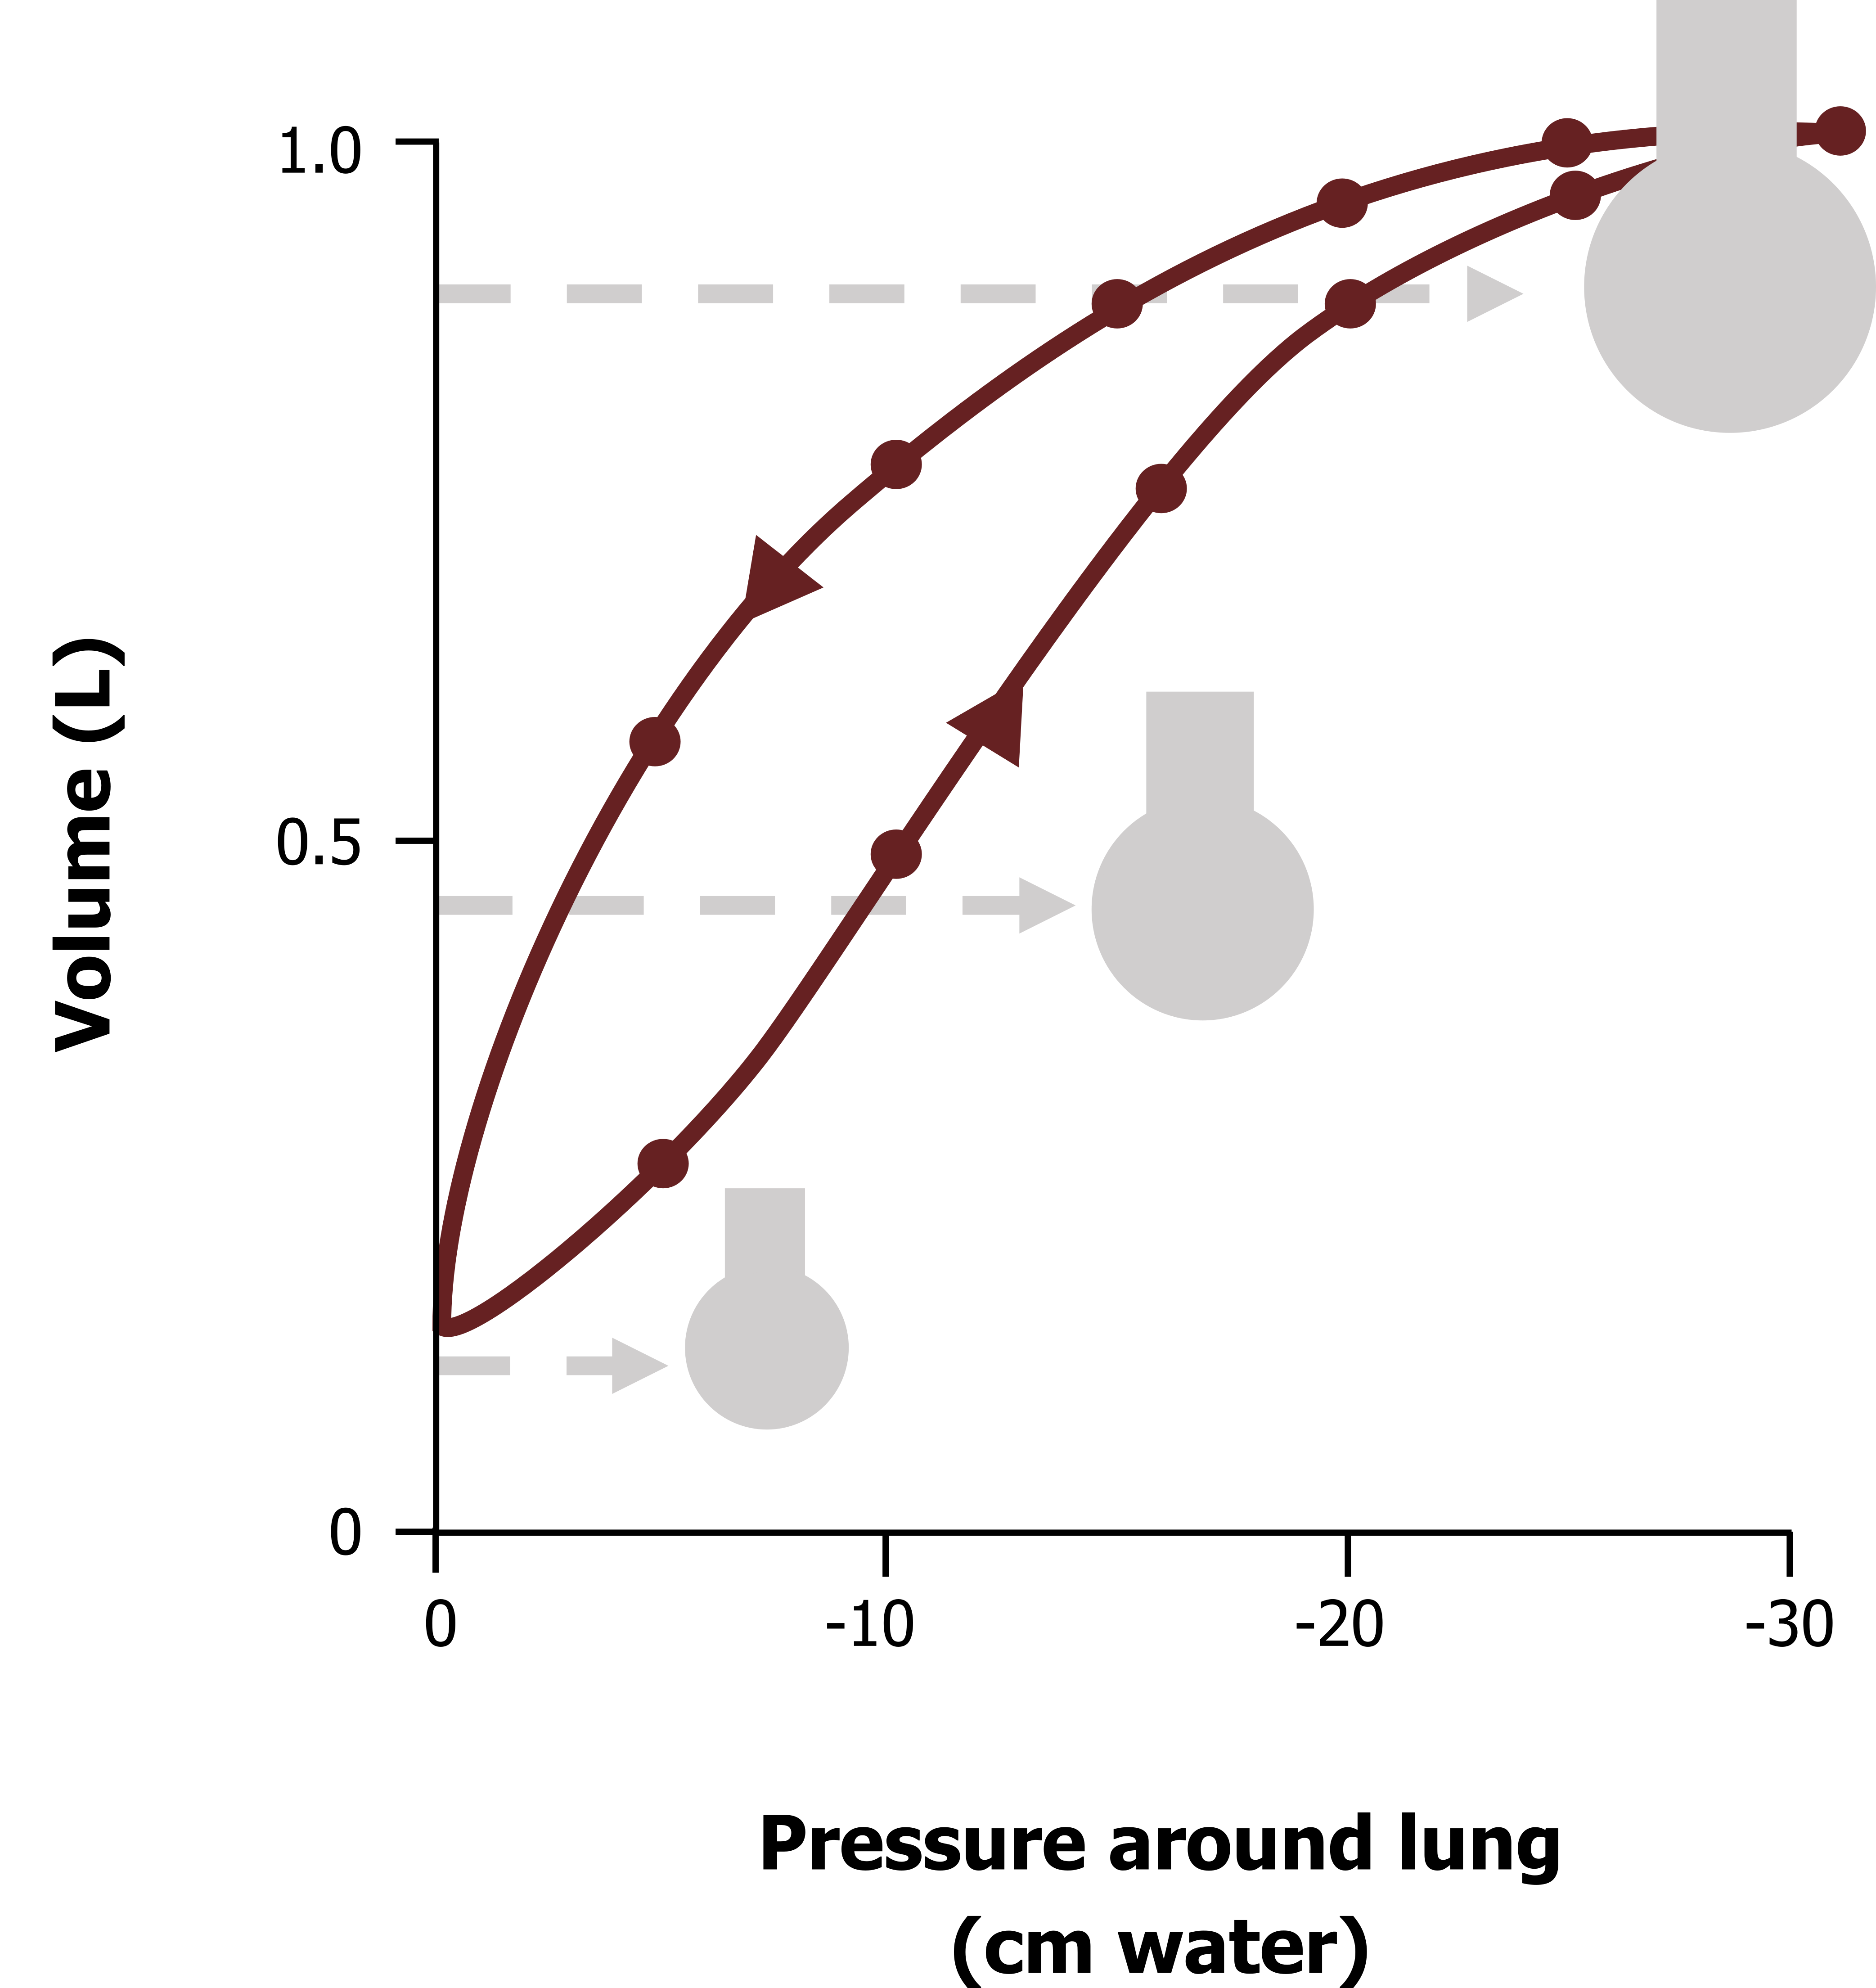 Graph as described in figure 2.3 with small, medium, and large alveoli depicted with horizontal arrows overlaid. Small alveoli at (-10, 0.1), medium alveoli at (-20, 0.4), and large alveoli at (-30, 0.8). All values are approximate.